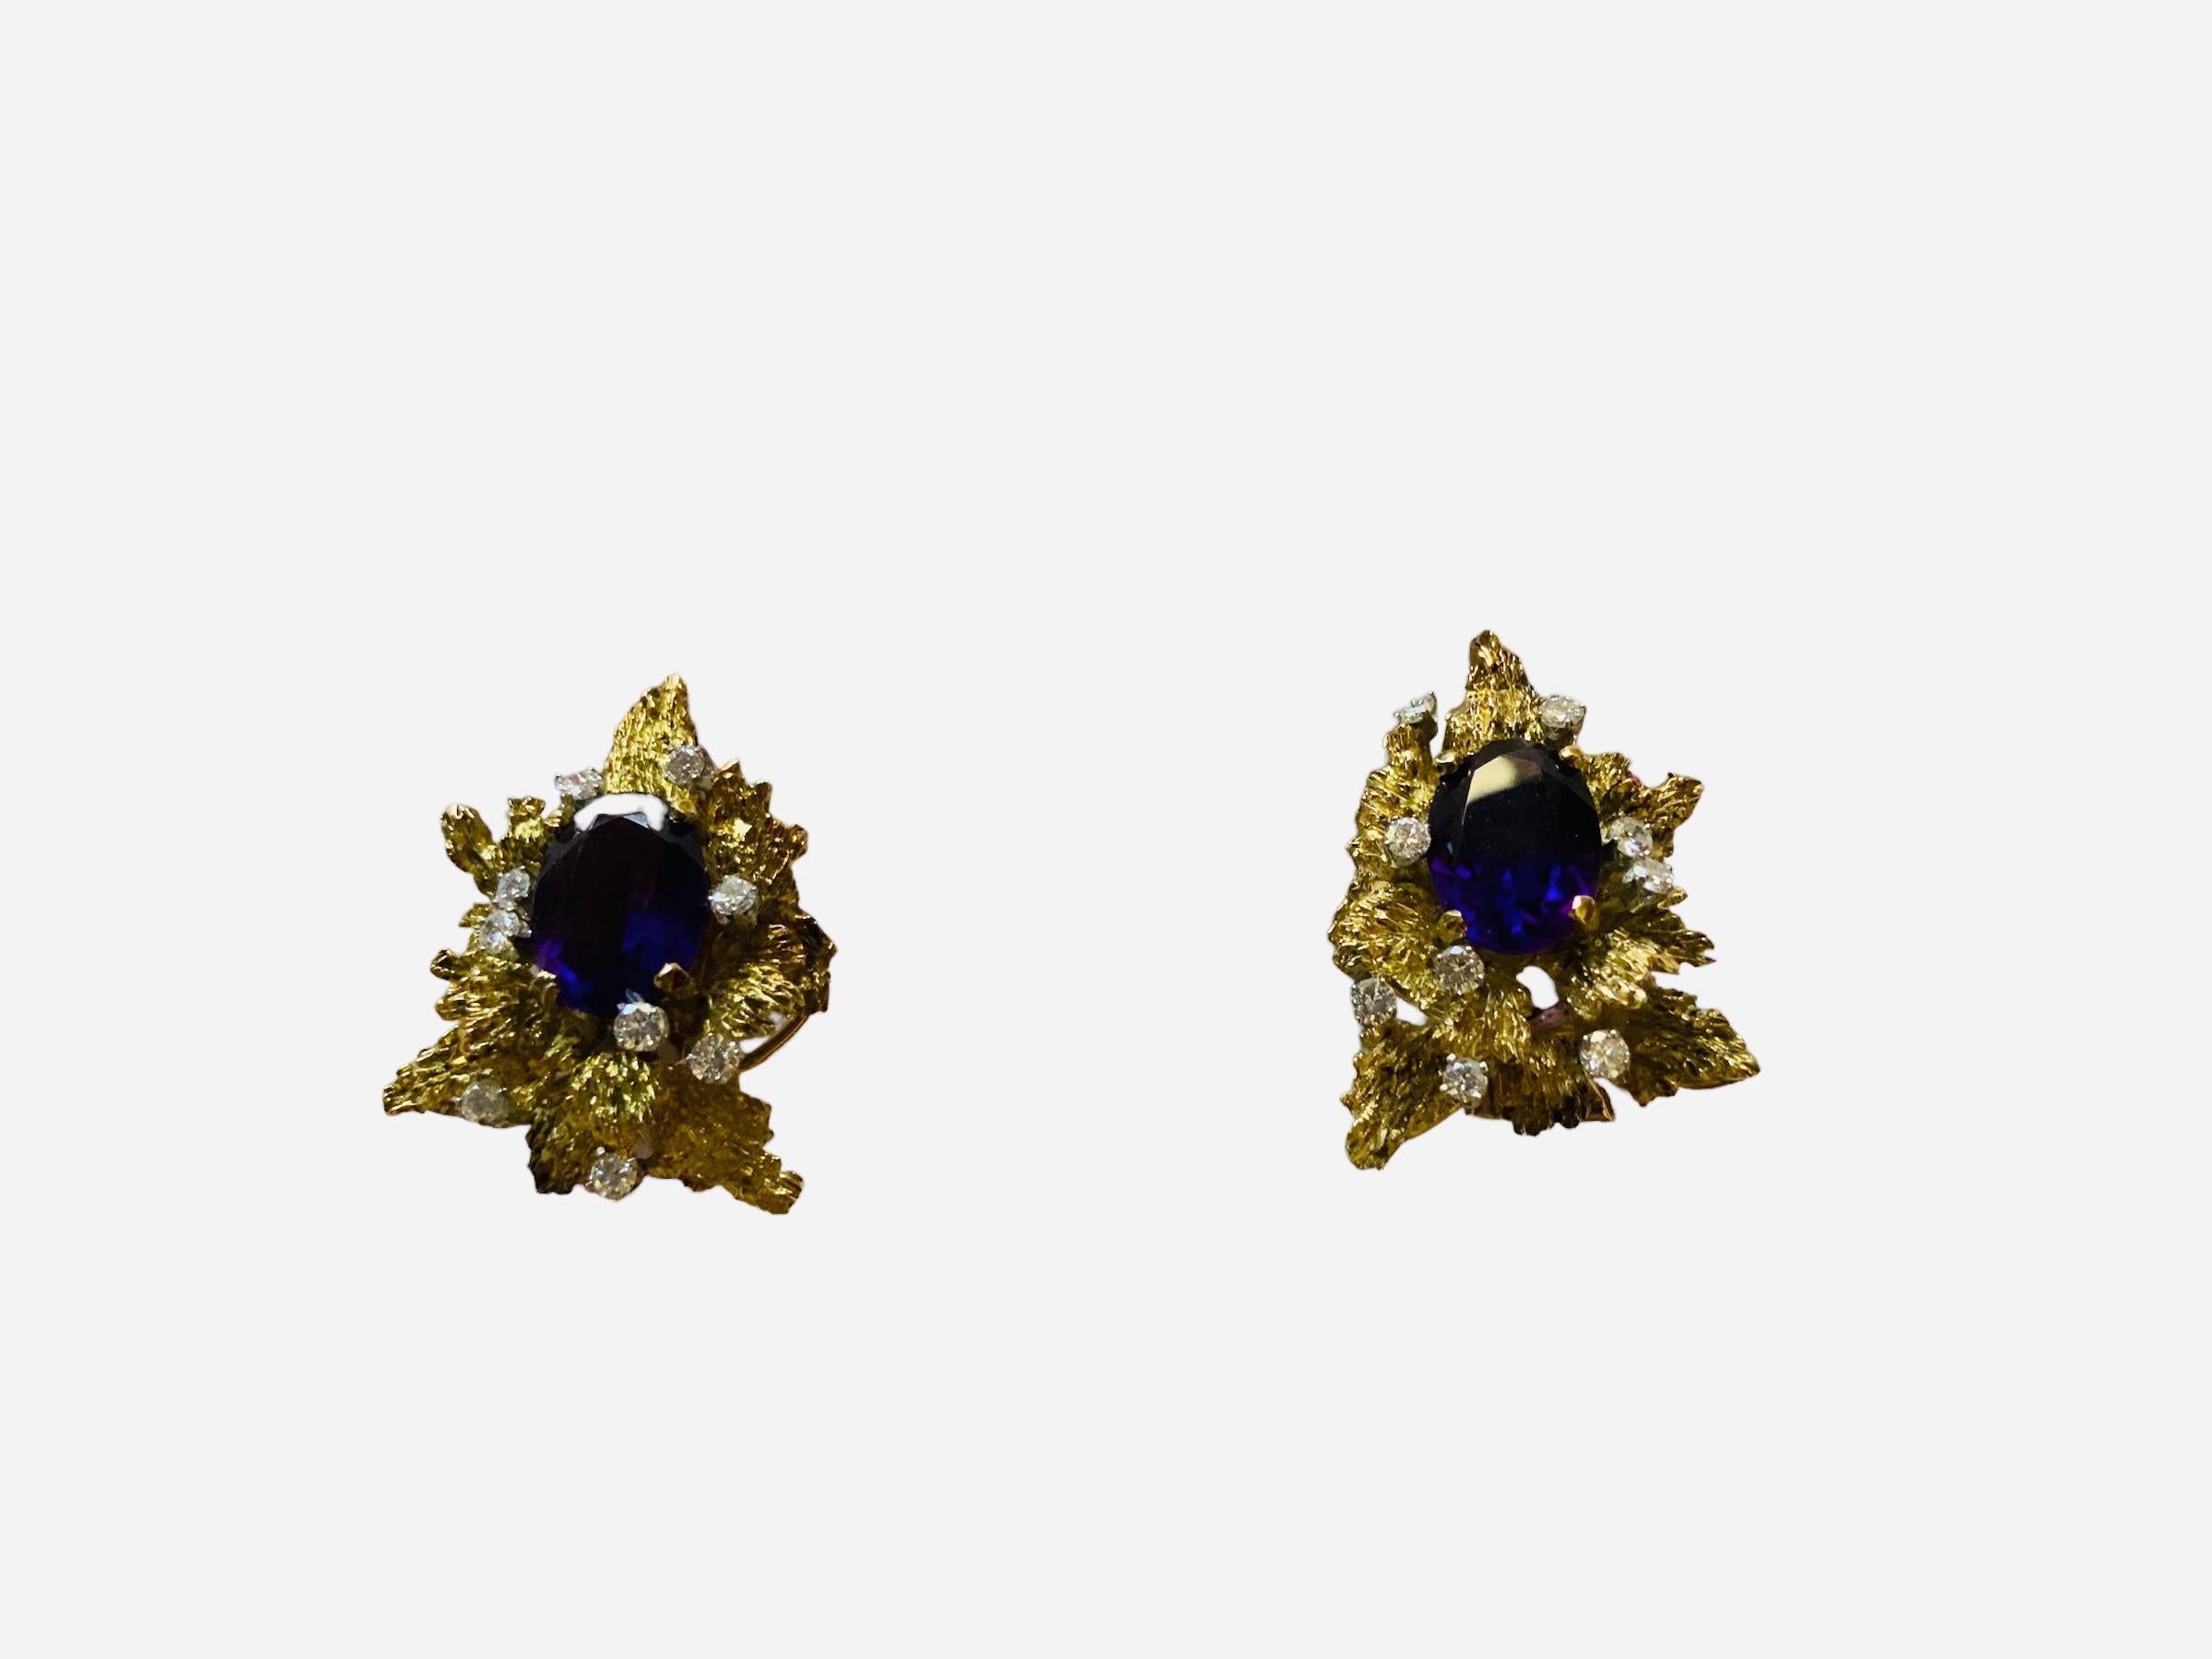 Modern Brutalist Style Pair Of 14K Gold Amethyst And Diamonds Earrings  For Sale